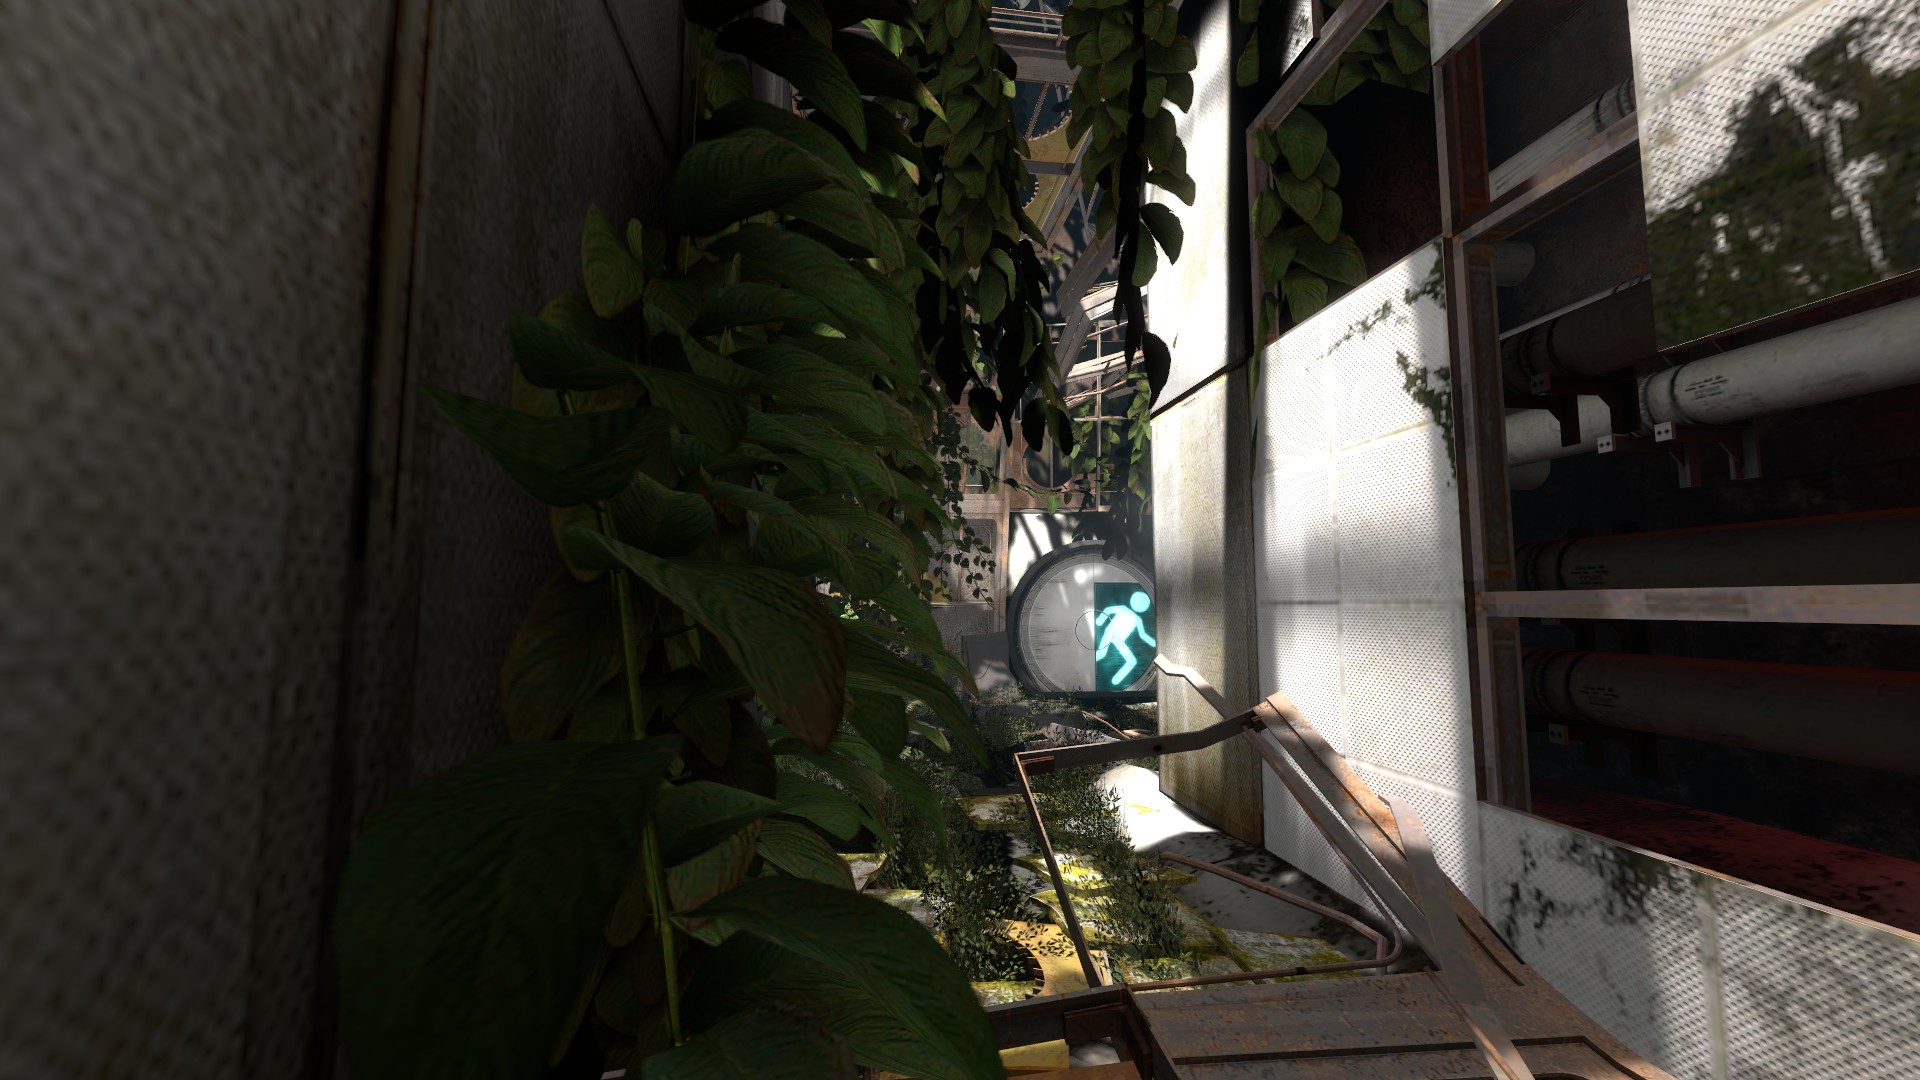 overgrowth mods download